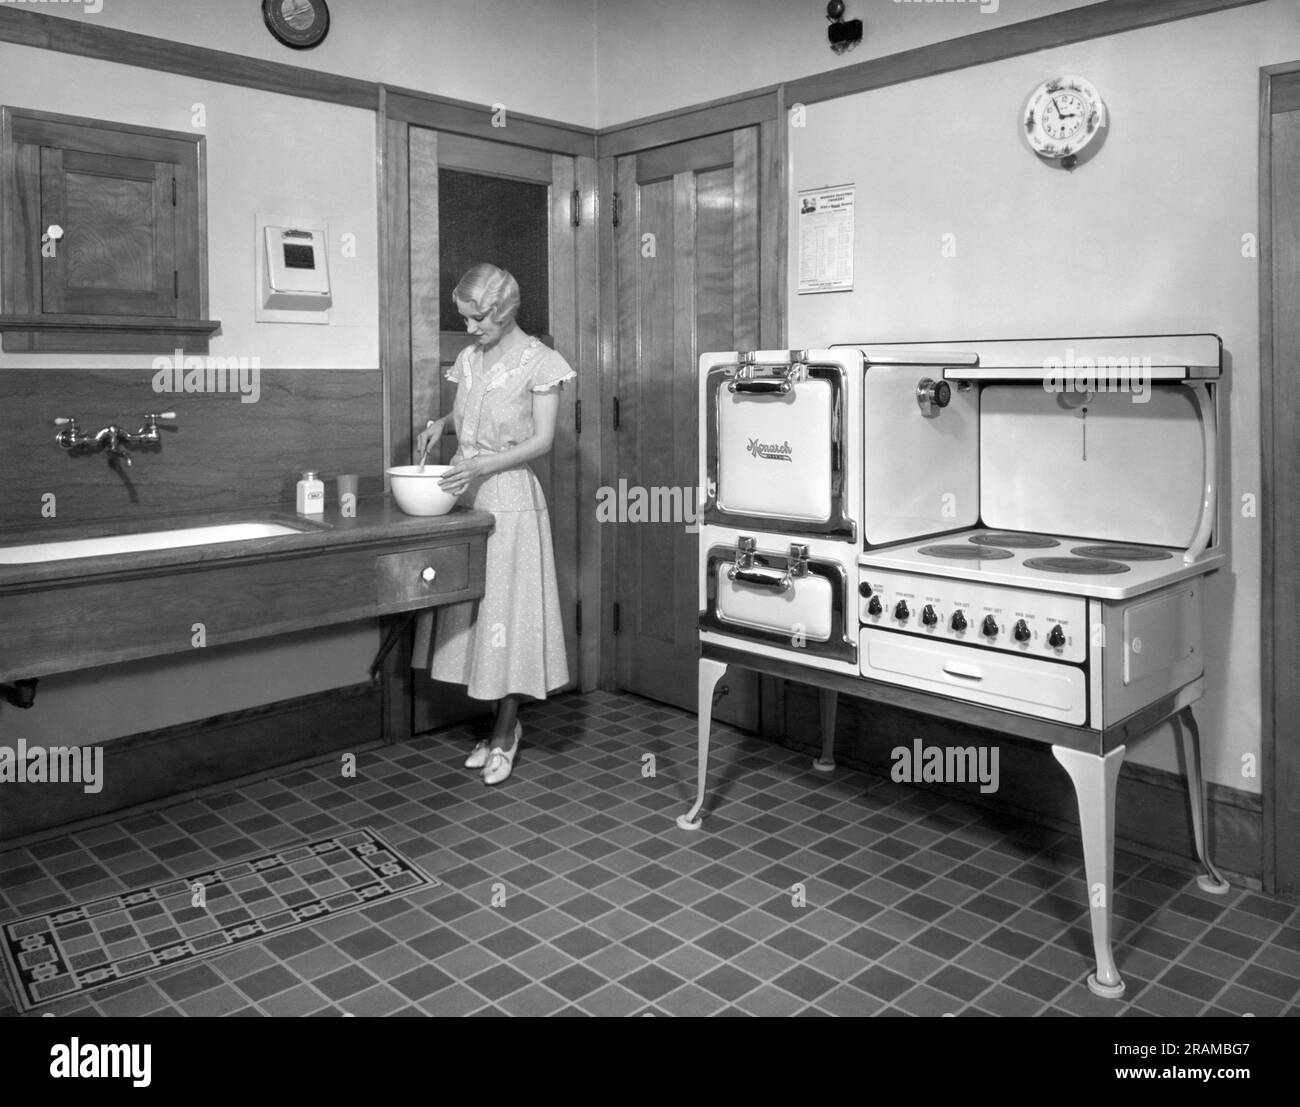 Beaver Dam, Wisconsin:  c. 1928. A woman cooking in her kitchen, which is equipped with a Monarch electric stove. Stock Photo